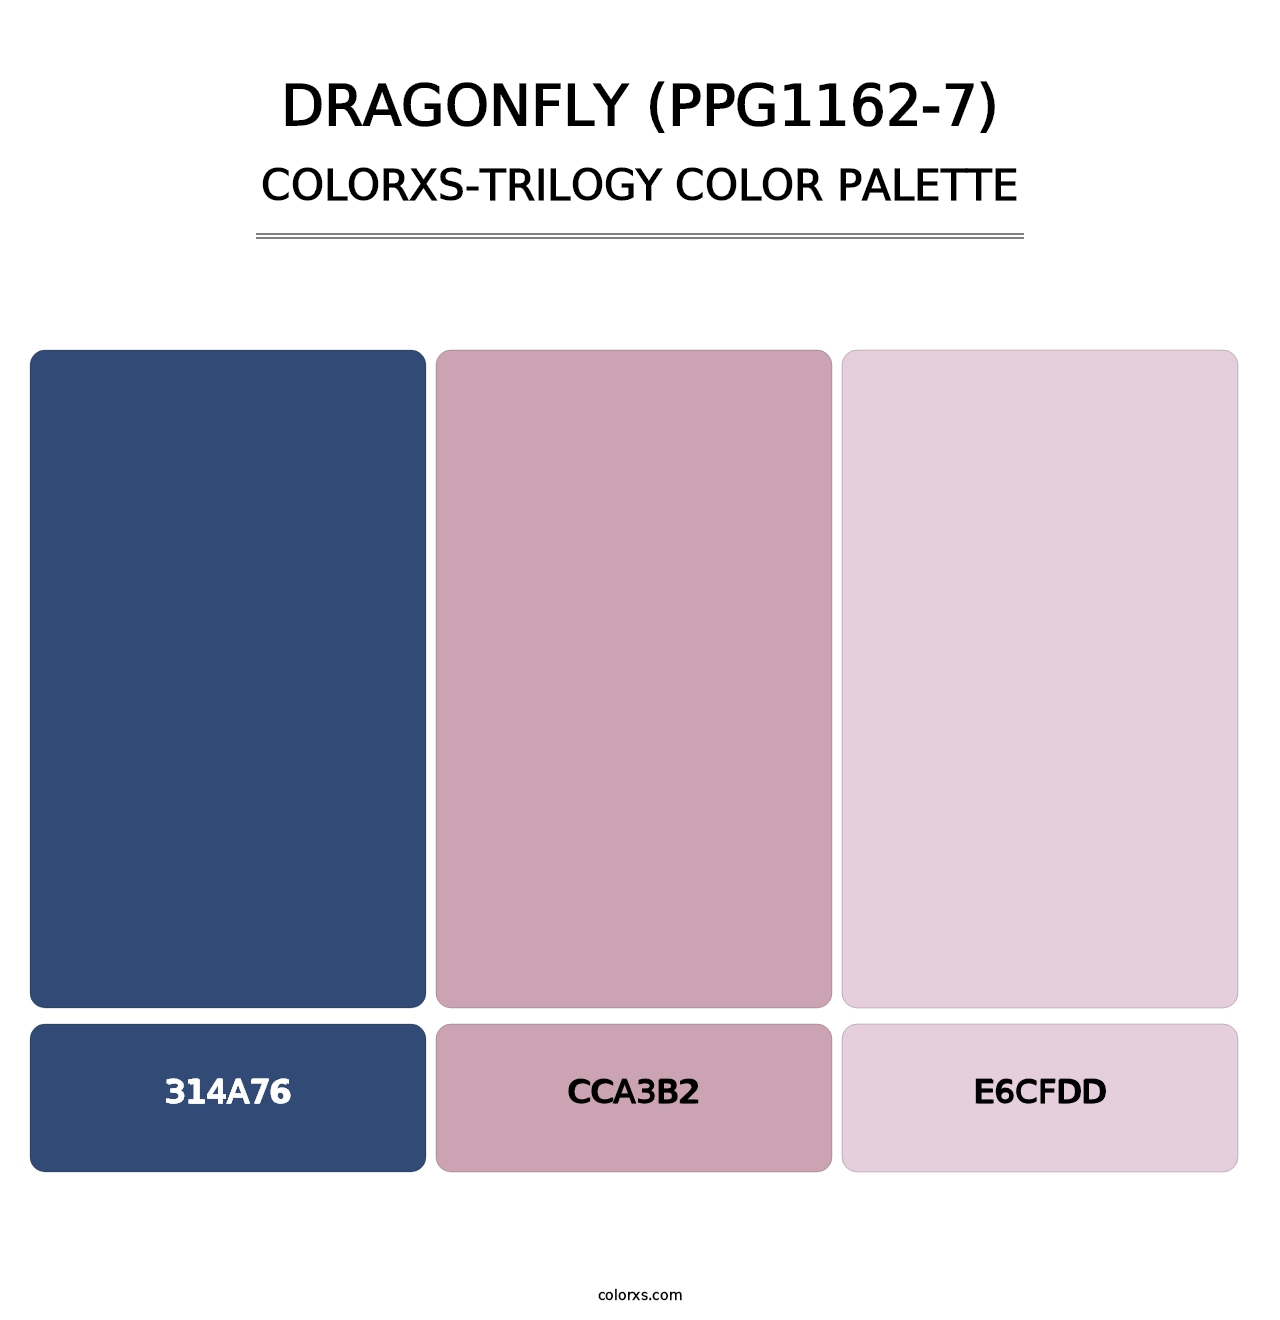 Dragonfly (PPG1162-7) - Colorxs Trilogy Palette